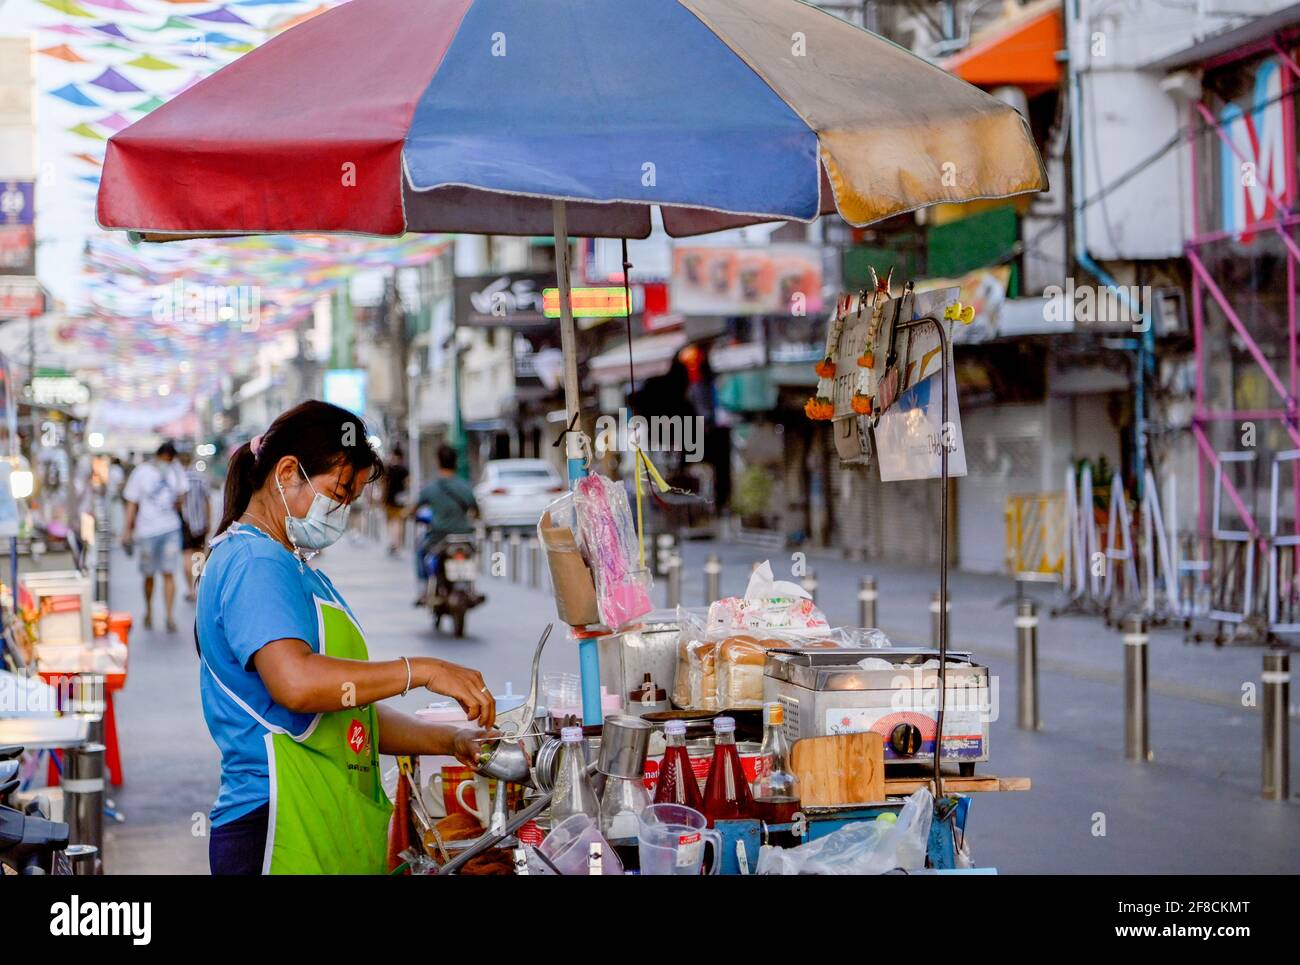 A vendor prepares food for sale on a  street during the Thai New Year Songkran holiday. Normally pre-pandemic covid -19, the street would be full of Thai and foreign tourists enjoying the celebration of the New Year harvest festival with water throwing and revelry. Bar and pubs are closed for 2 weeks during Songkran from April 6-19, 2021. (Photo by Paul Lakatos / SOPA Images/Sipa USA) Stock Photo